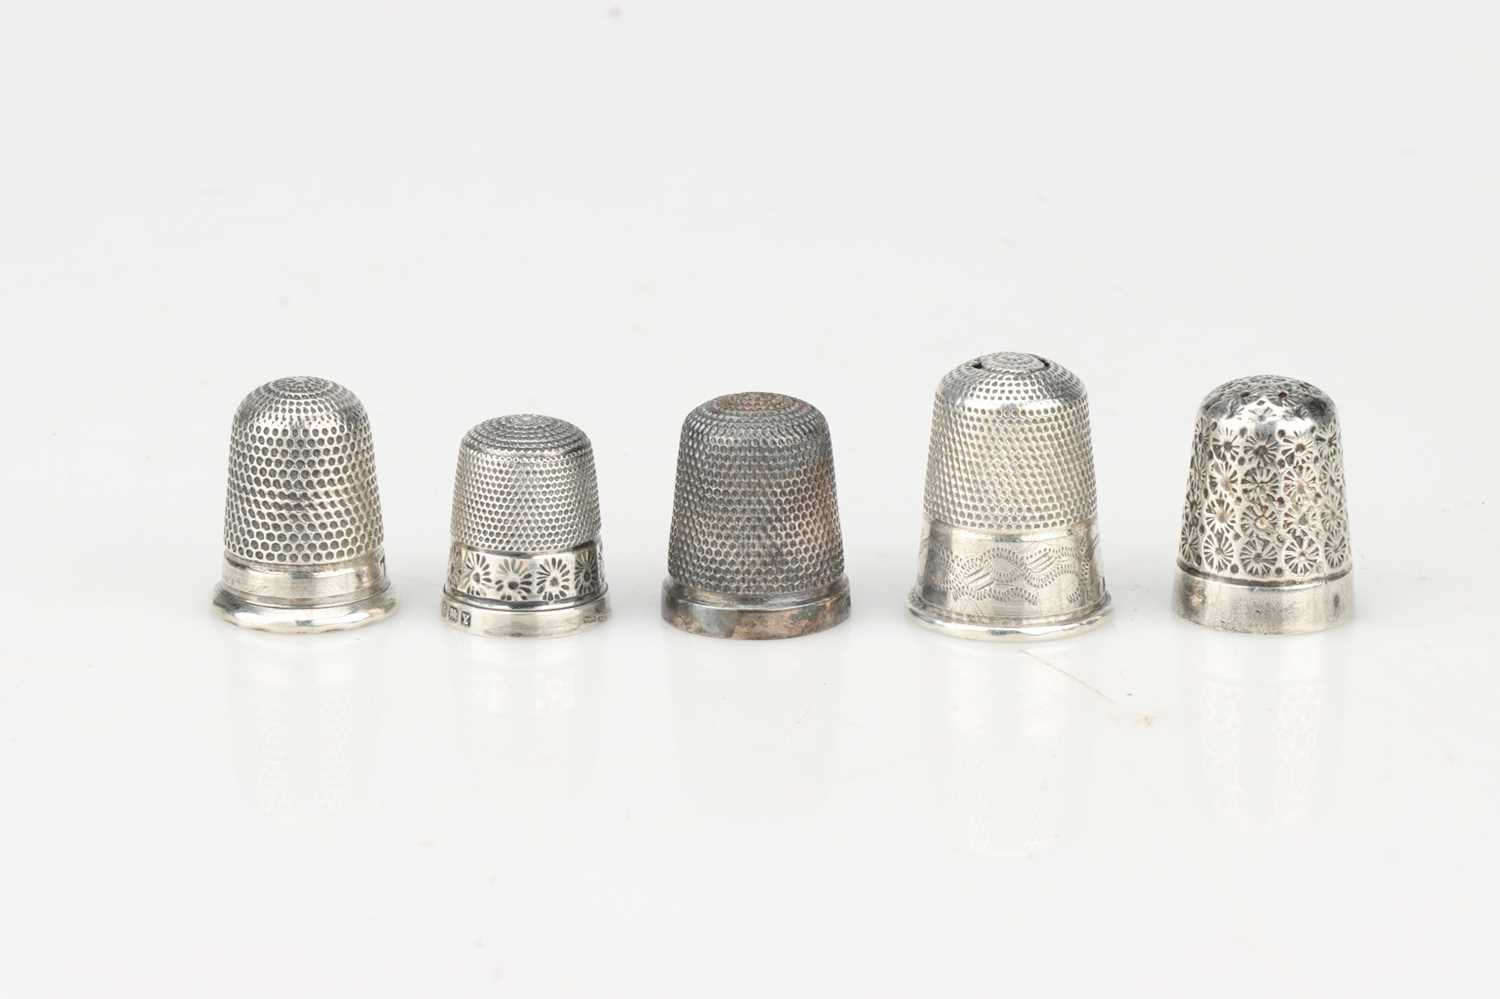 Lot 62 - A Group of Five Silver Thimbles